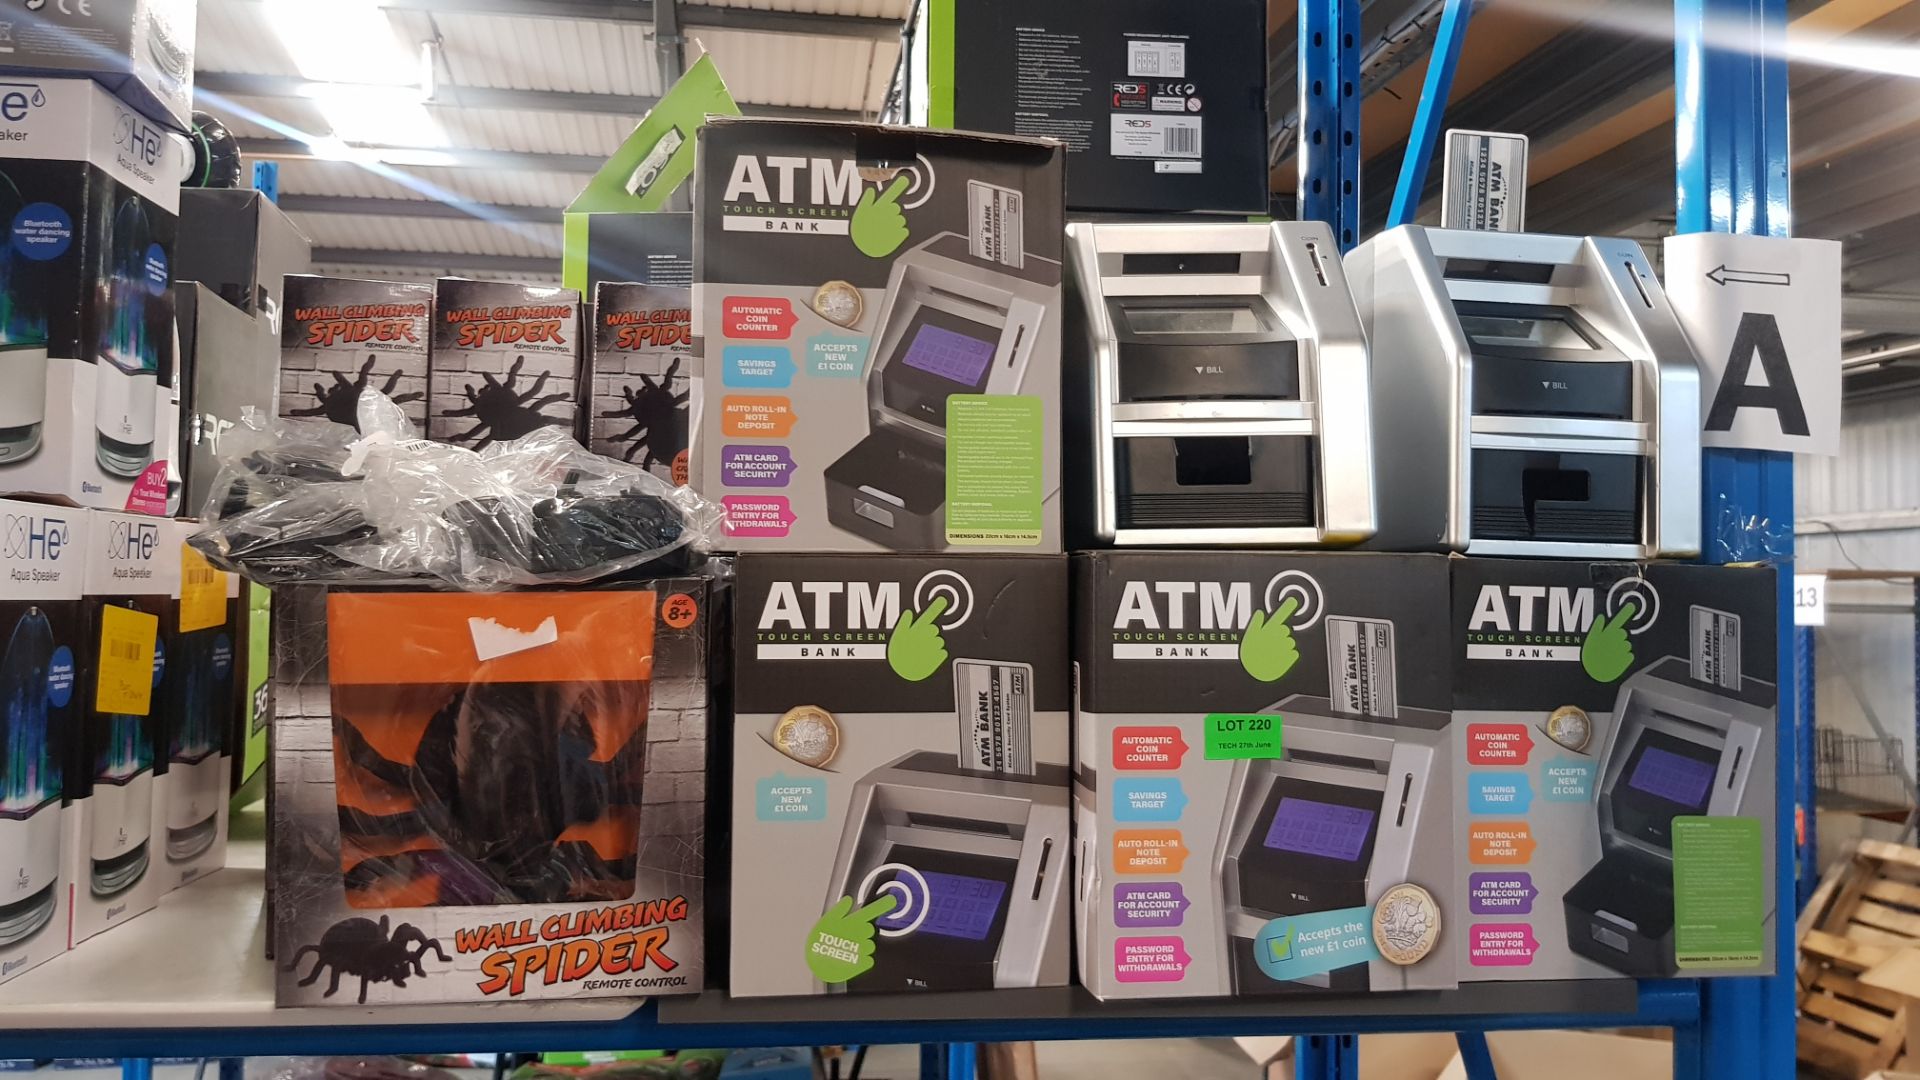 (R1A) Approx. 24 Items. 14x ATM Touch Screen Bank (2x No Box). 10x RC Wall Climbing Spider (1x No - Image 2 of 2